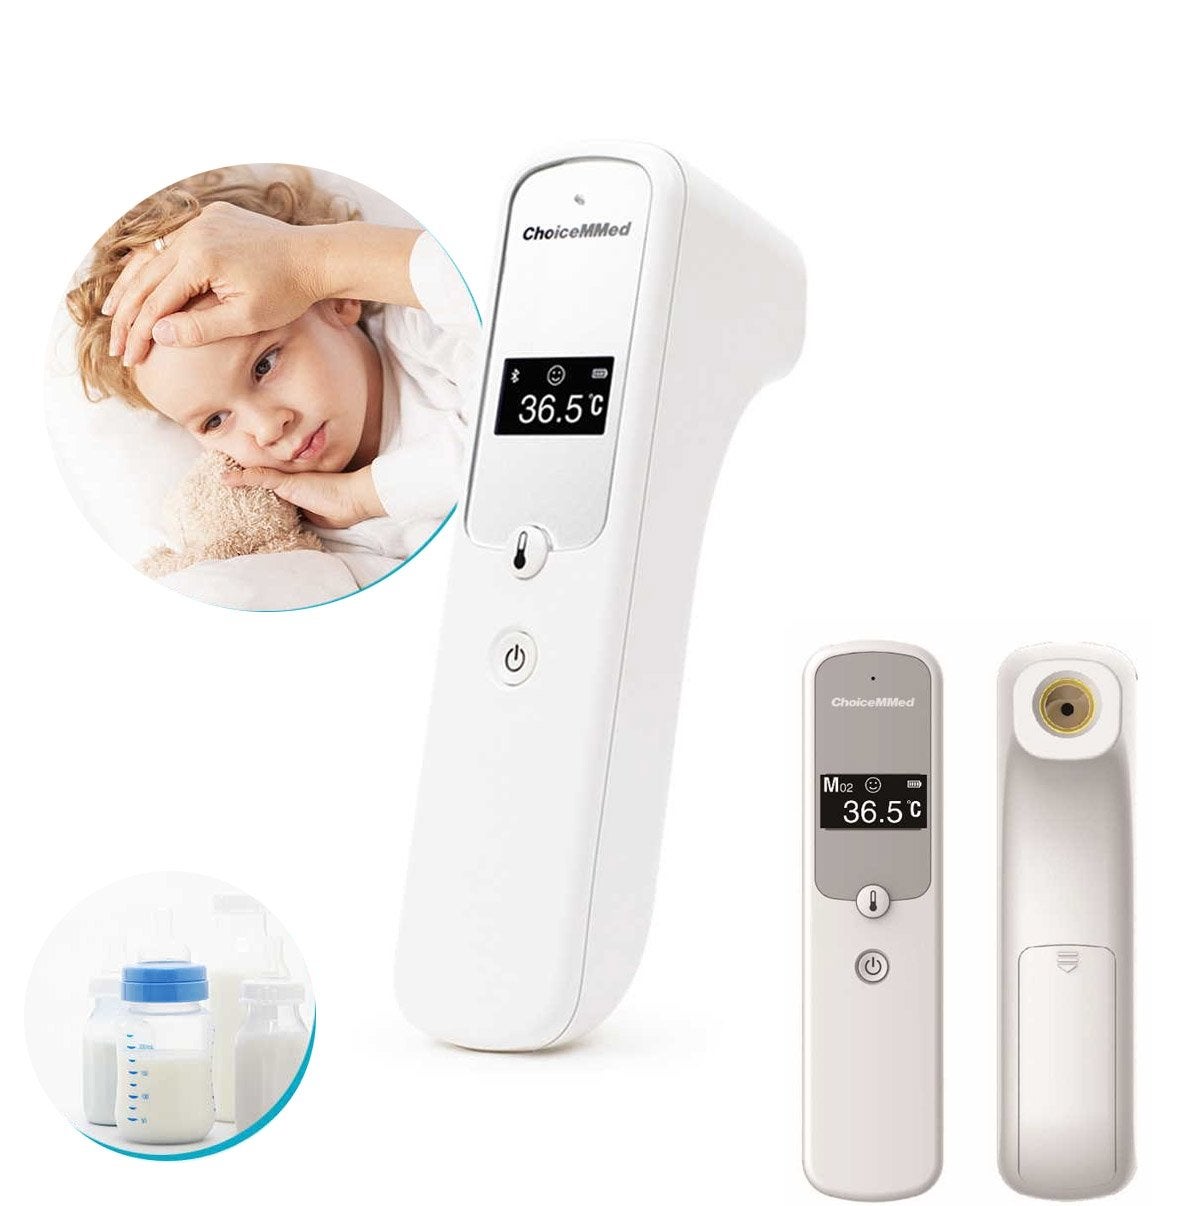 Smart Dual Mode Infrared Thermometer - Bluetooth